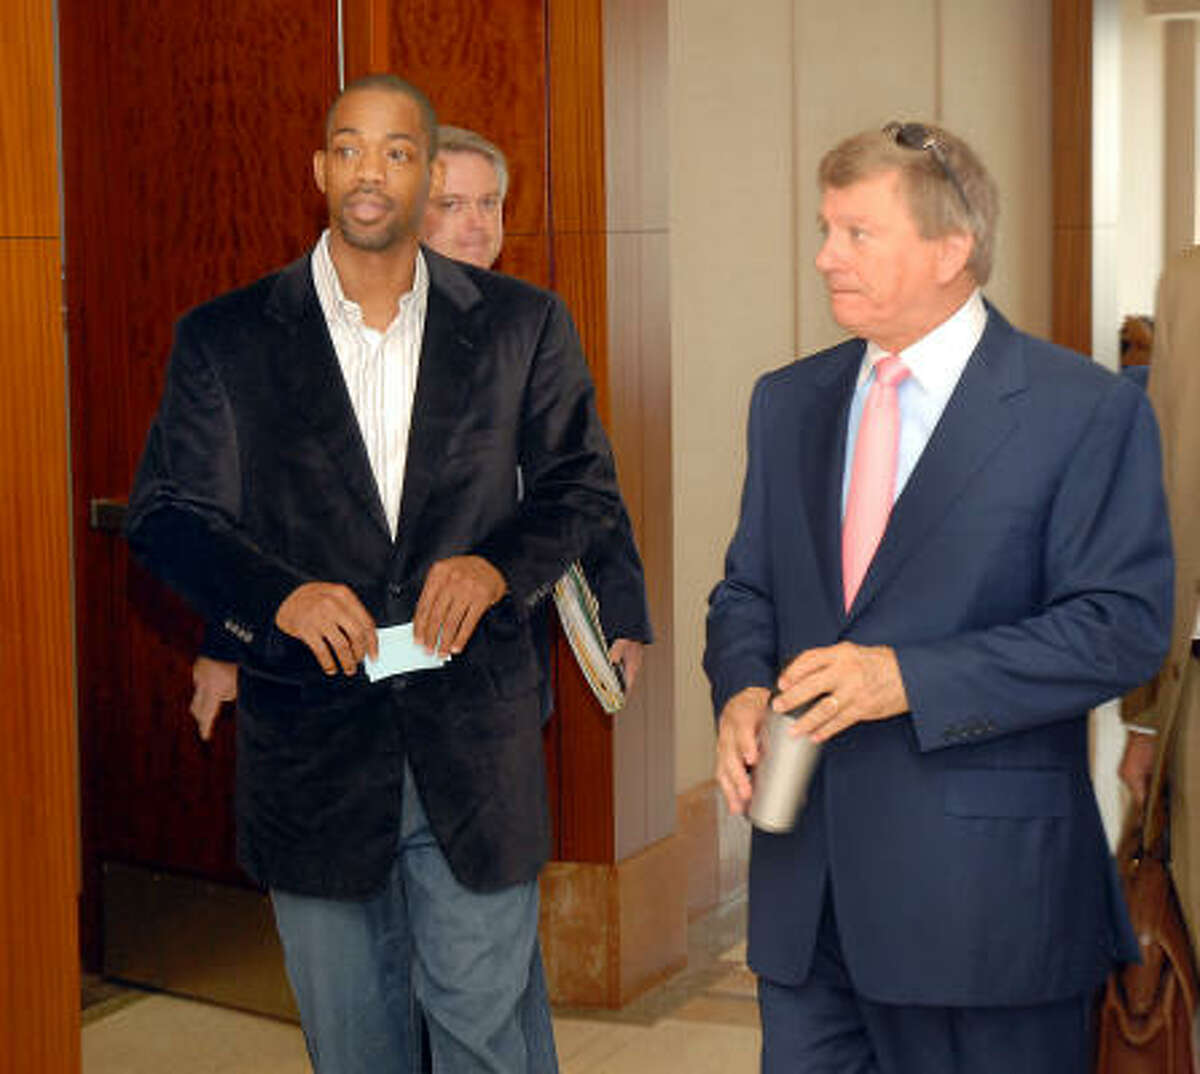 Houston Rockets guard Rafer Alston, shown leaving court last month with his attorney, Rusty Hardin, right, is set for trial in October on a drunken-driving charge.